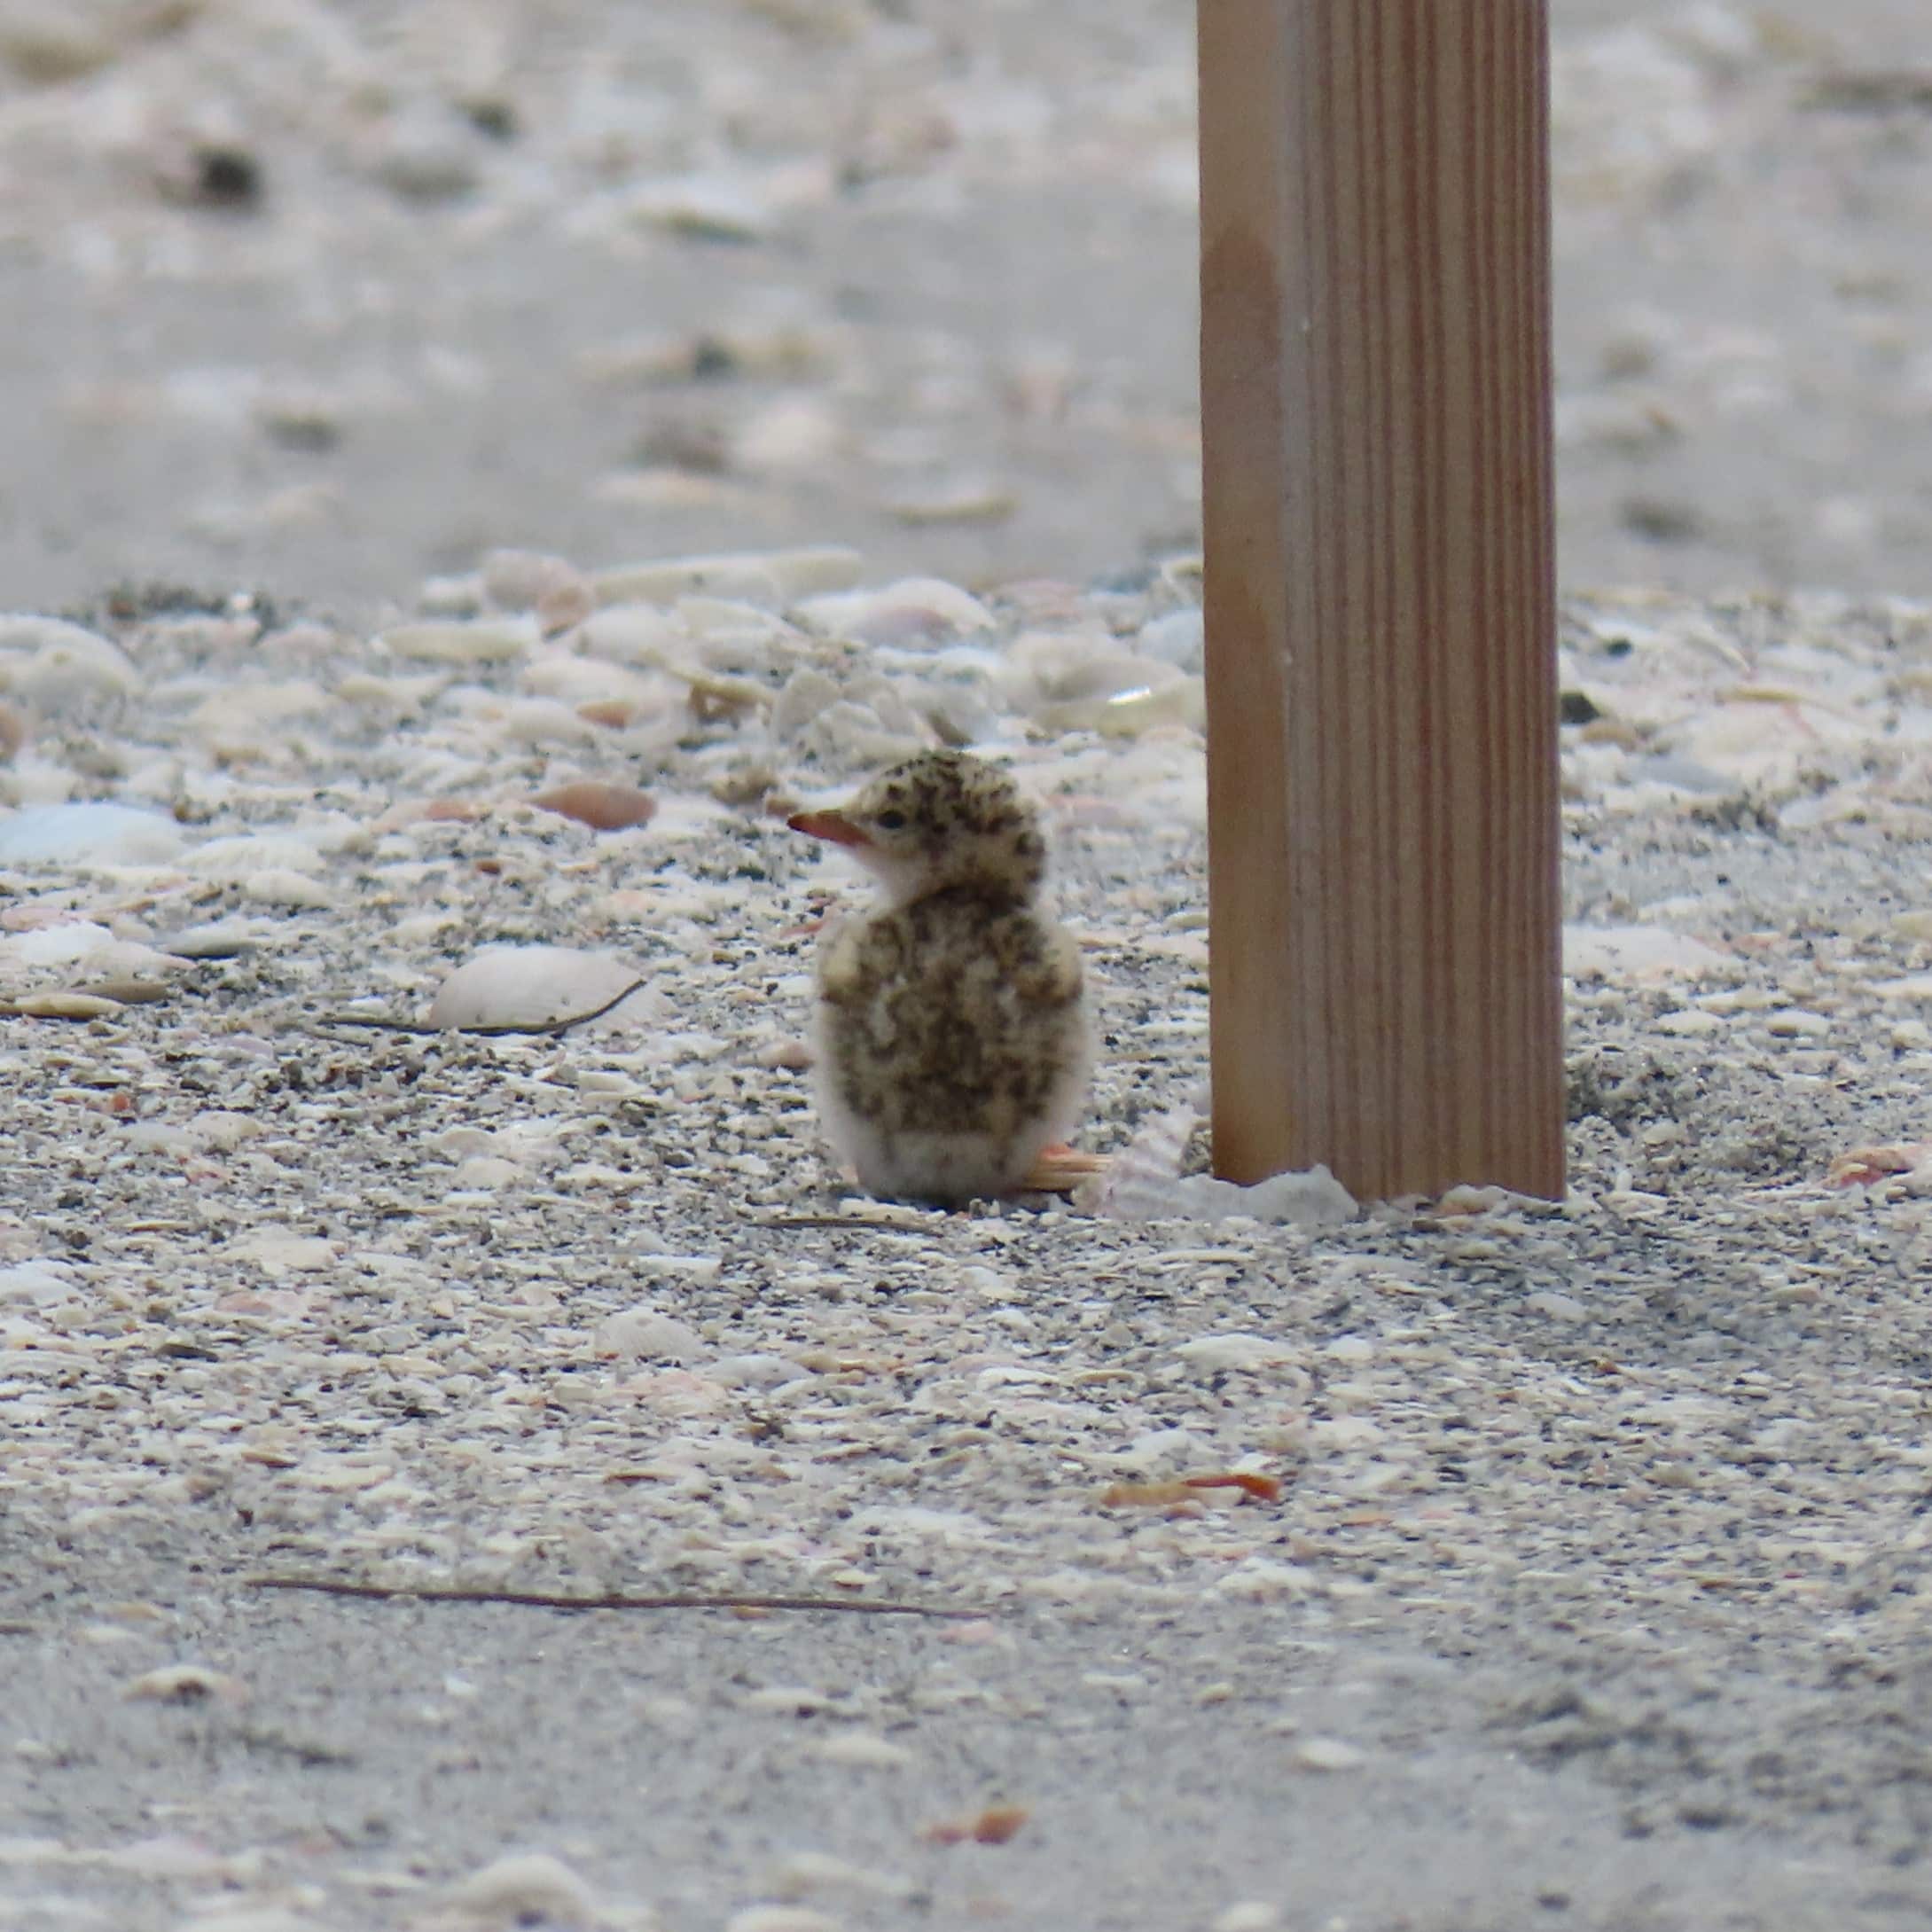 newly hatched least tern chick sitting in sand